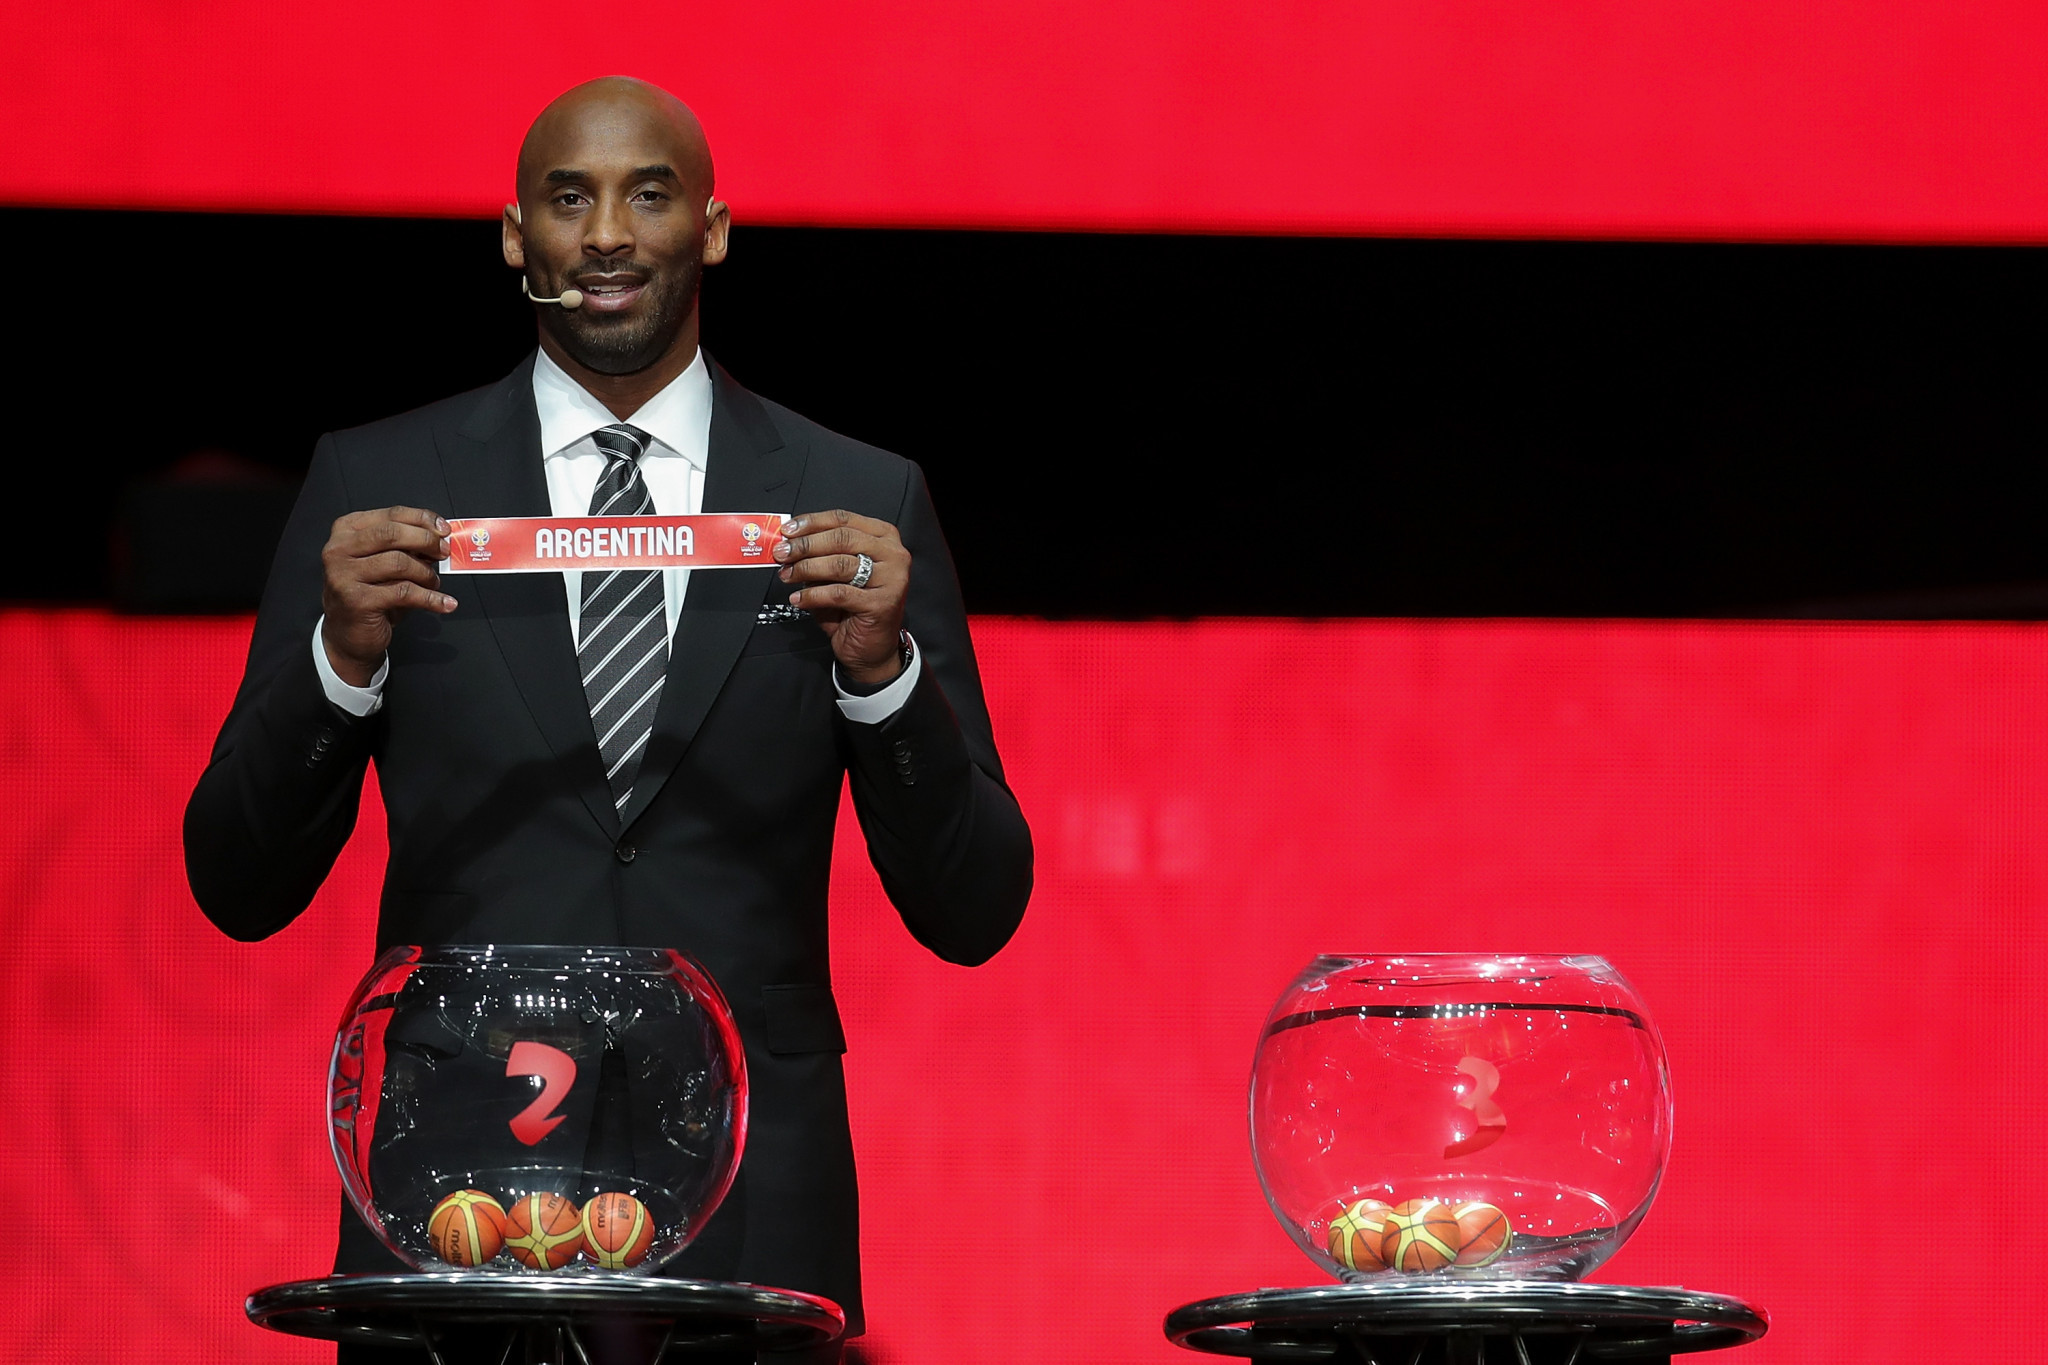 America's Kobe Bryant was at the FIBA Basketball World Cup 2019 draw in Shenzhen ©Getty Images